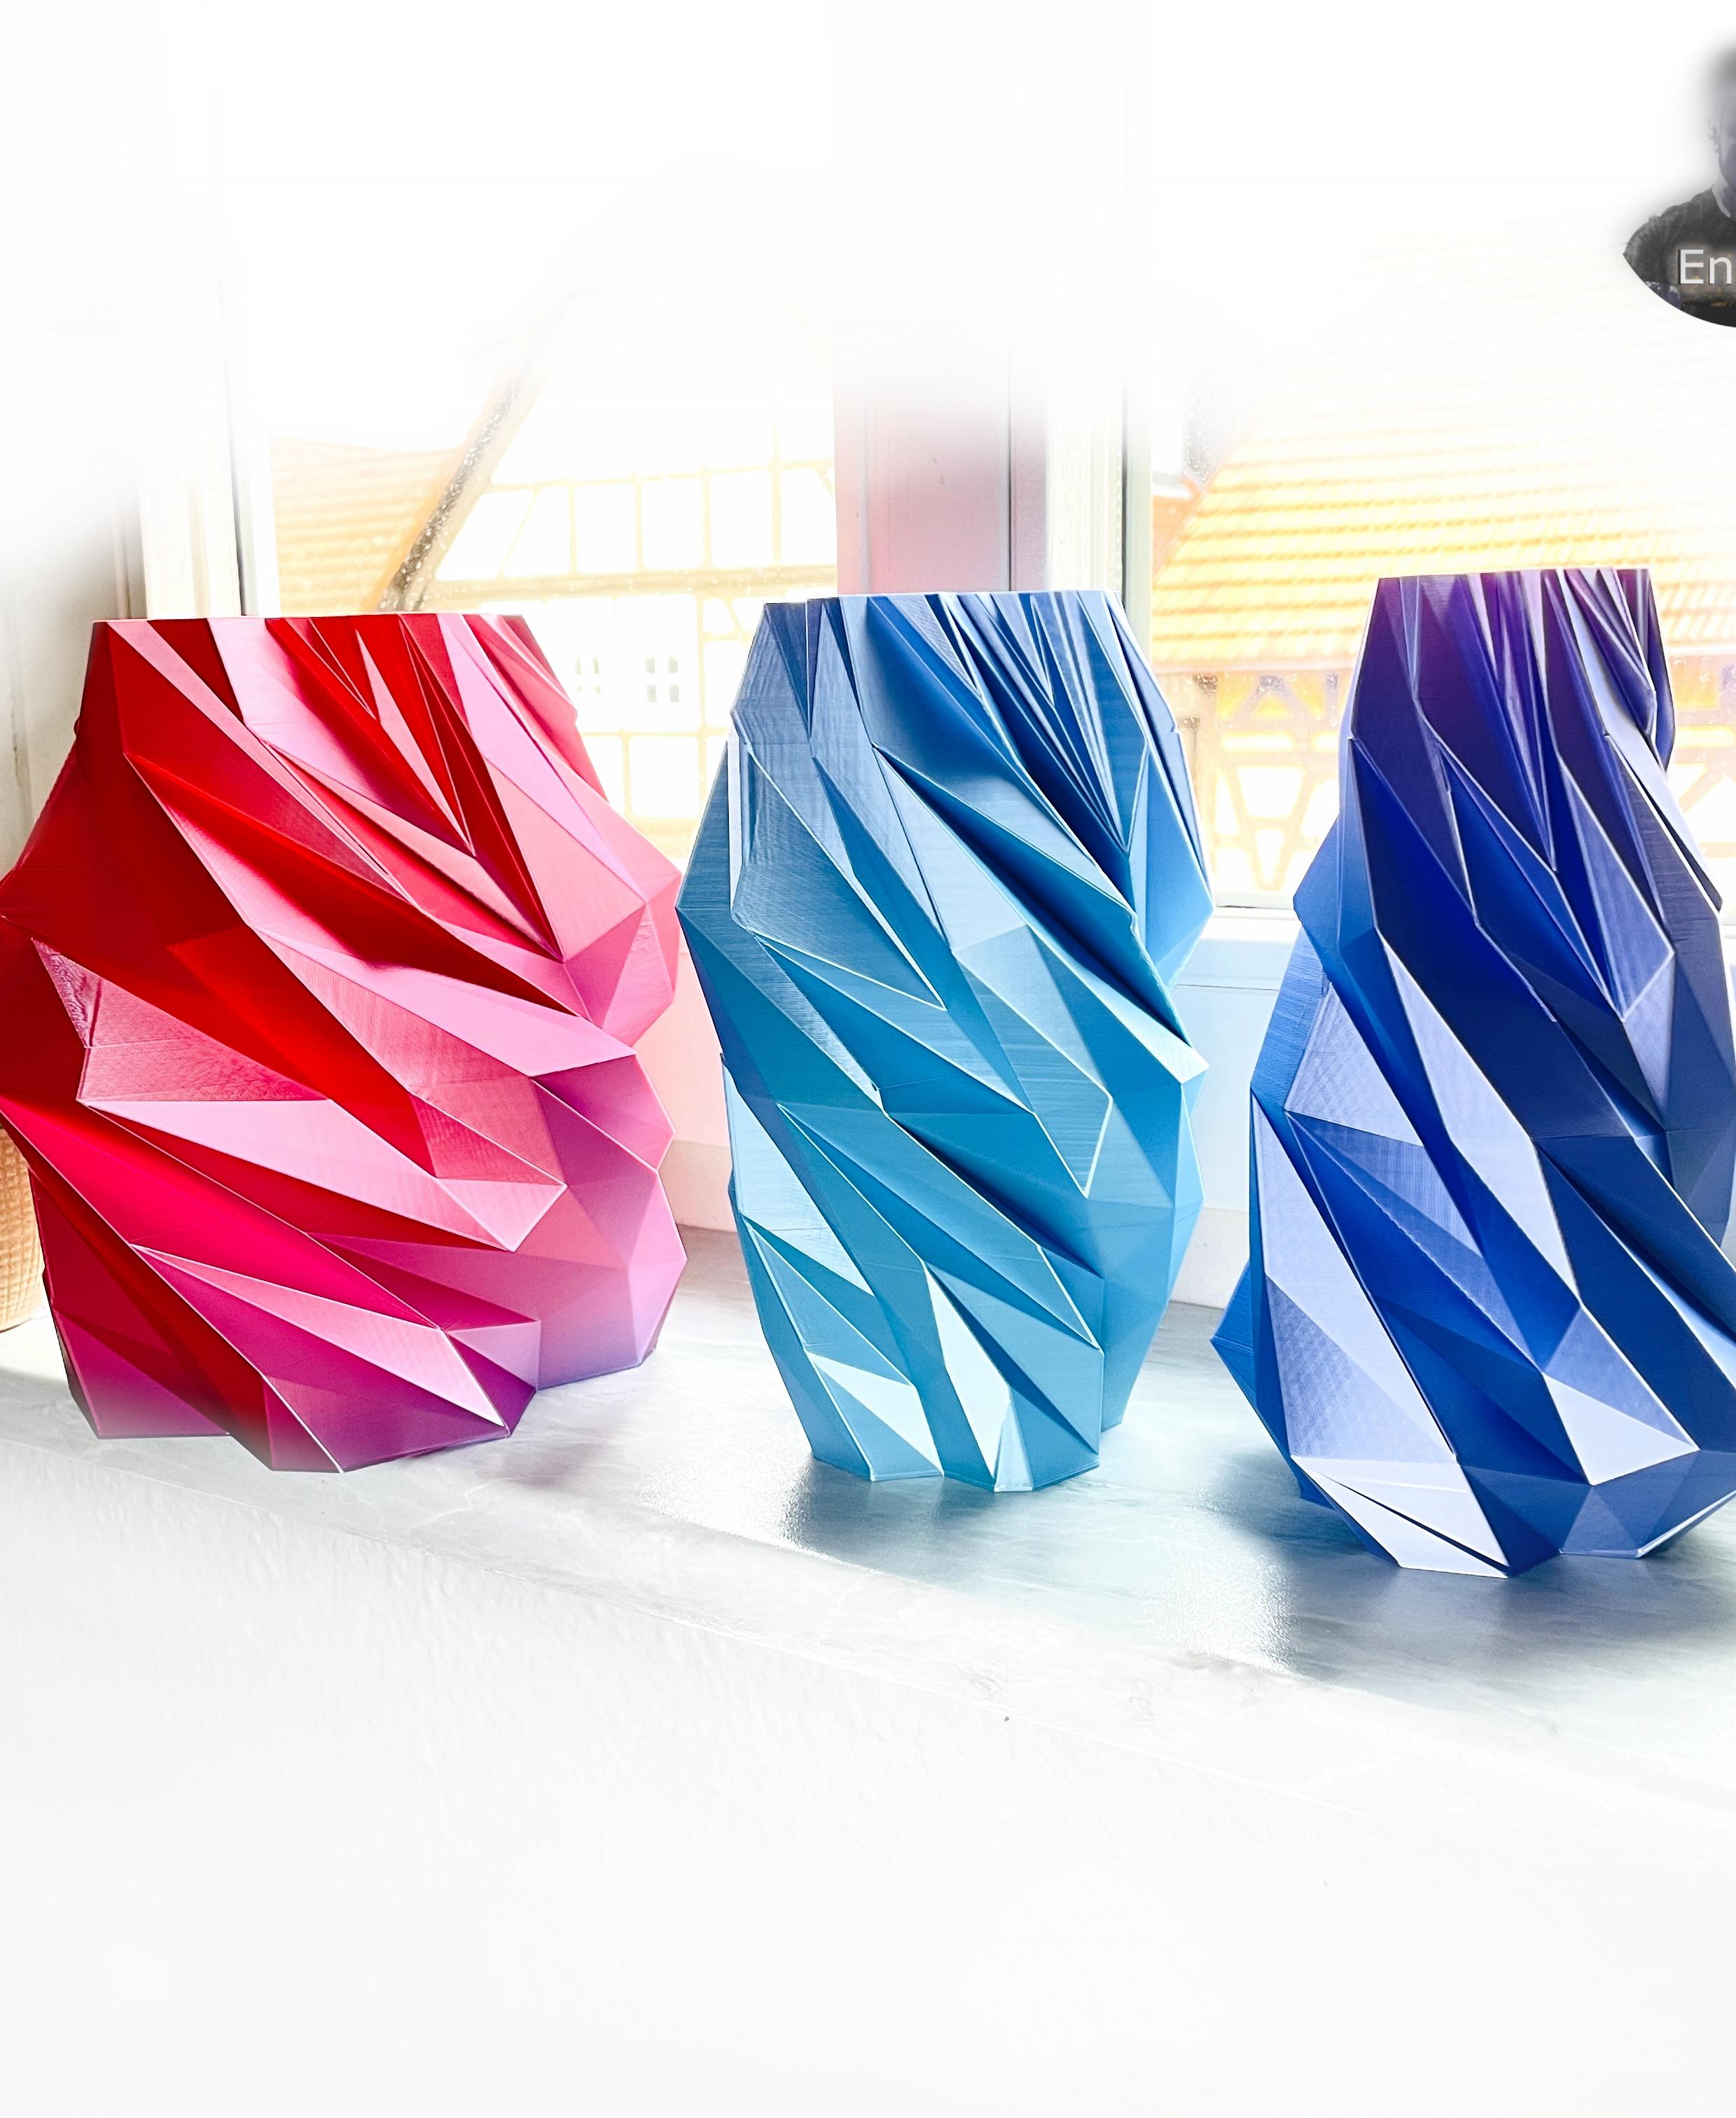 Special Low Poly Vases - 3 Designs 3d model